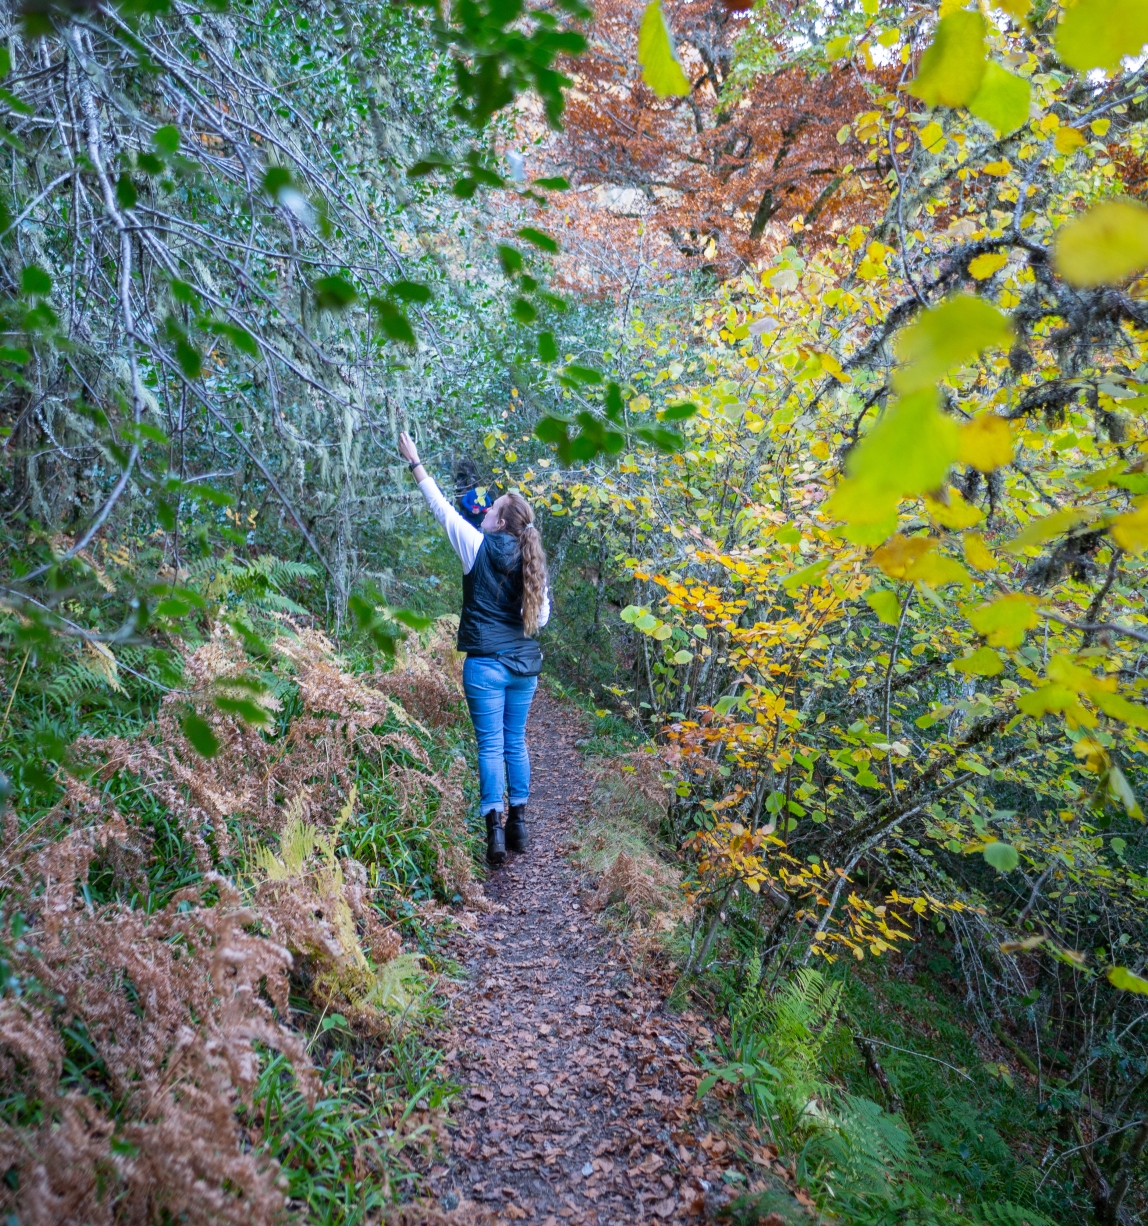 Woman walking in autumnal forest reaches up to touch tree leaves